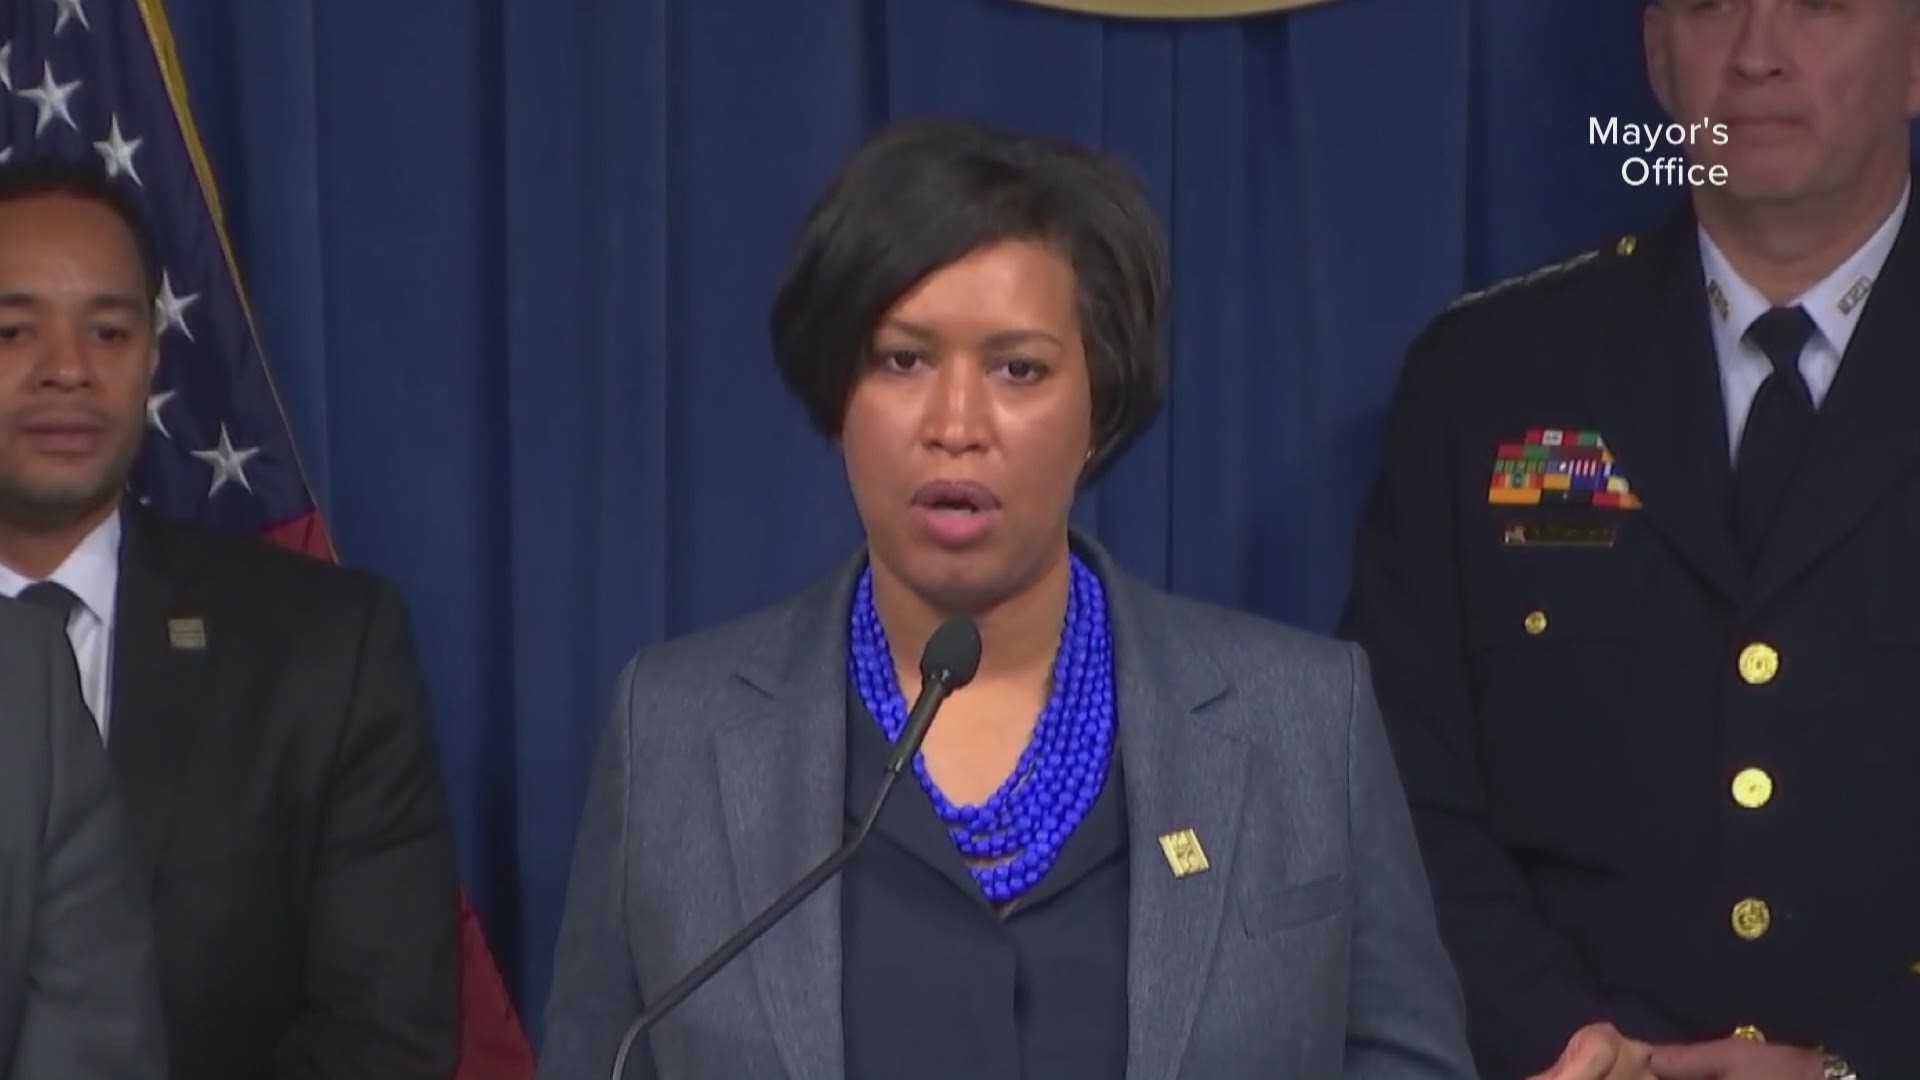 DC Mayor Muriel Bowser unveiled her budget for Fiscal Year 2020 last week.